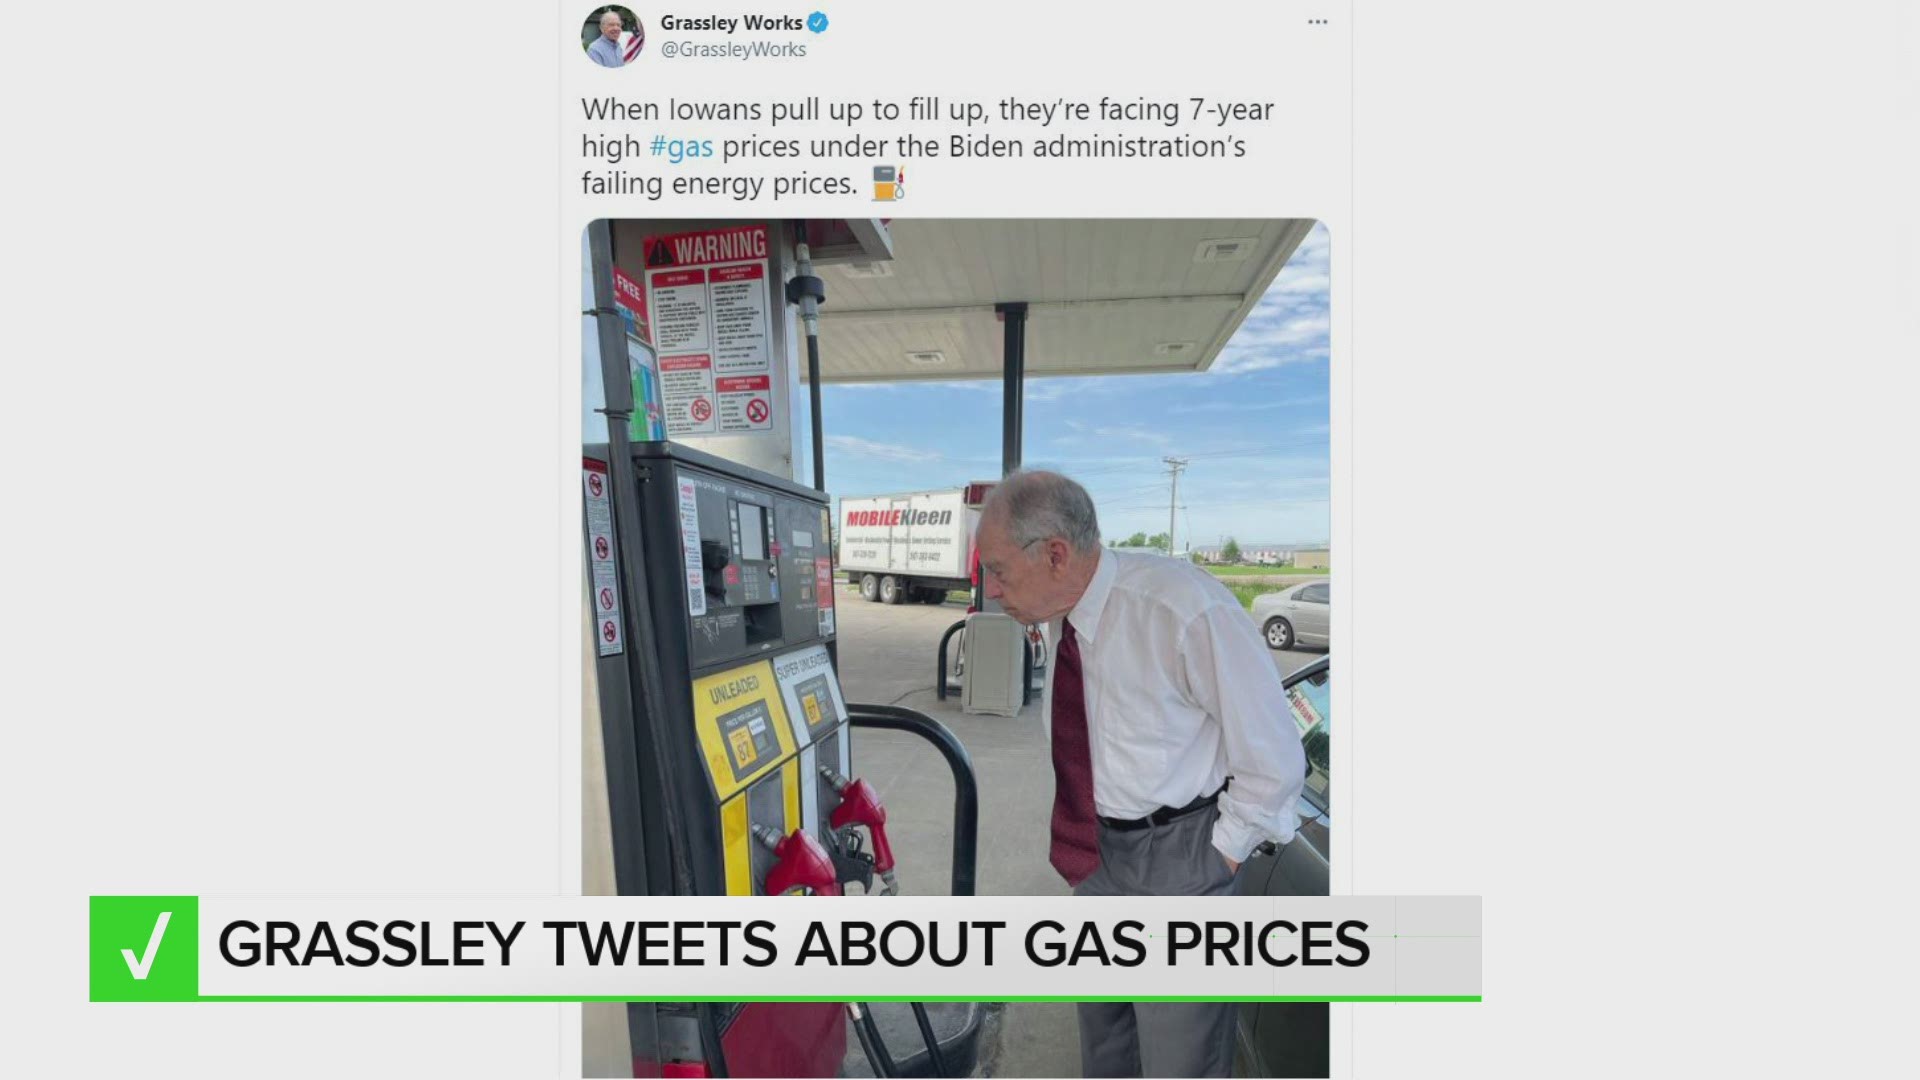 Republican Sen. Chuck Grassley tweeted Iowans are paying more for gas now than in the last seven years, but that's not true. Let's VERIFY.